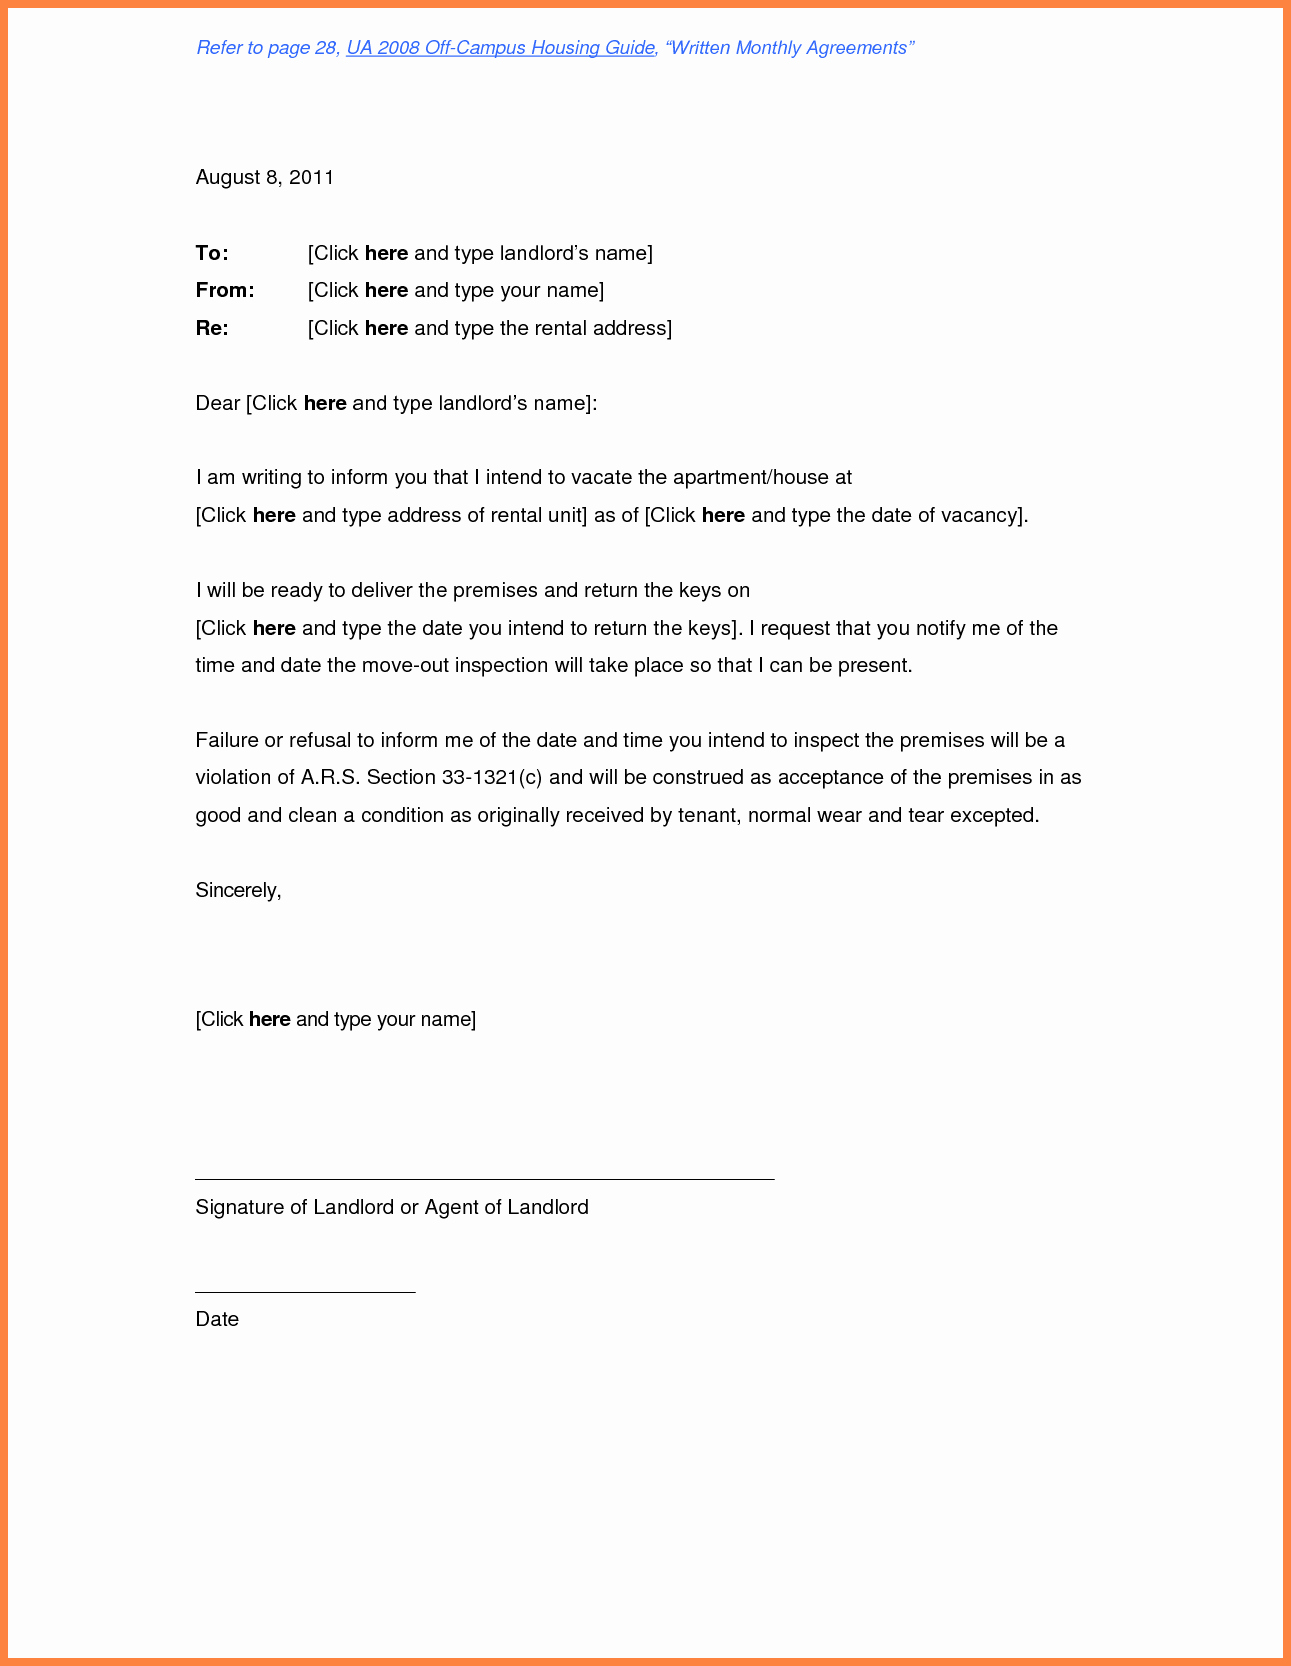 Sample Letter to Landlord New 8 Termination Of Rental Agreement Letter by Tenant